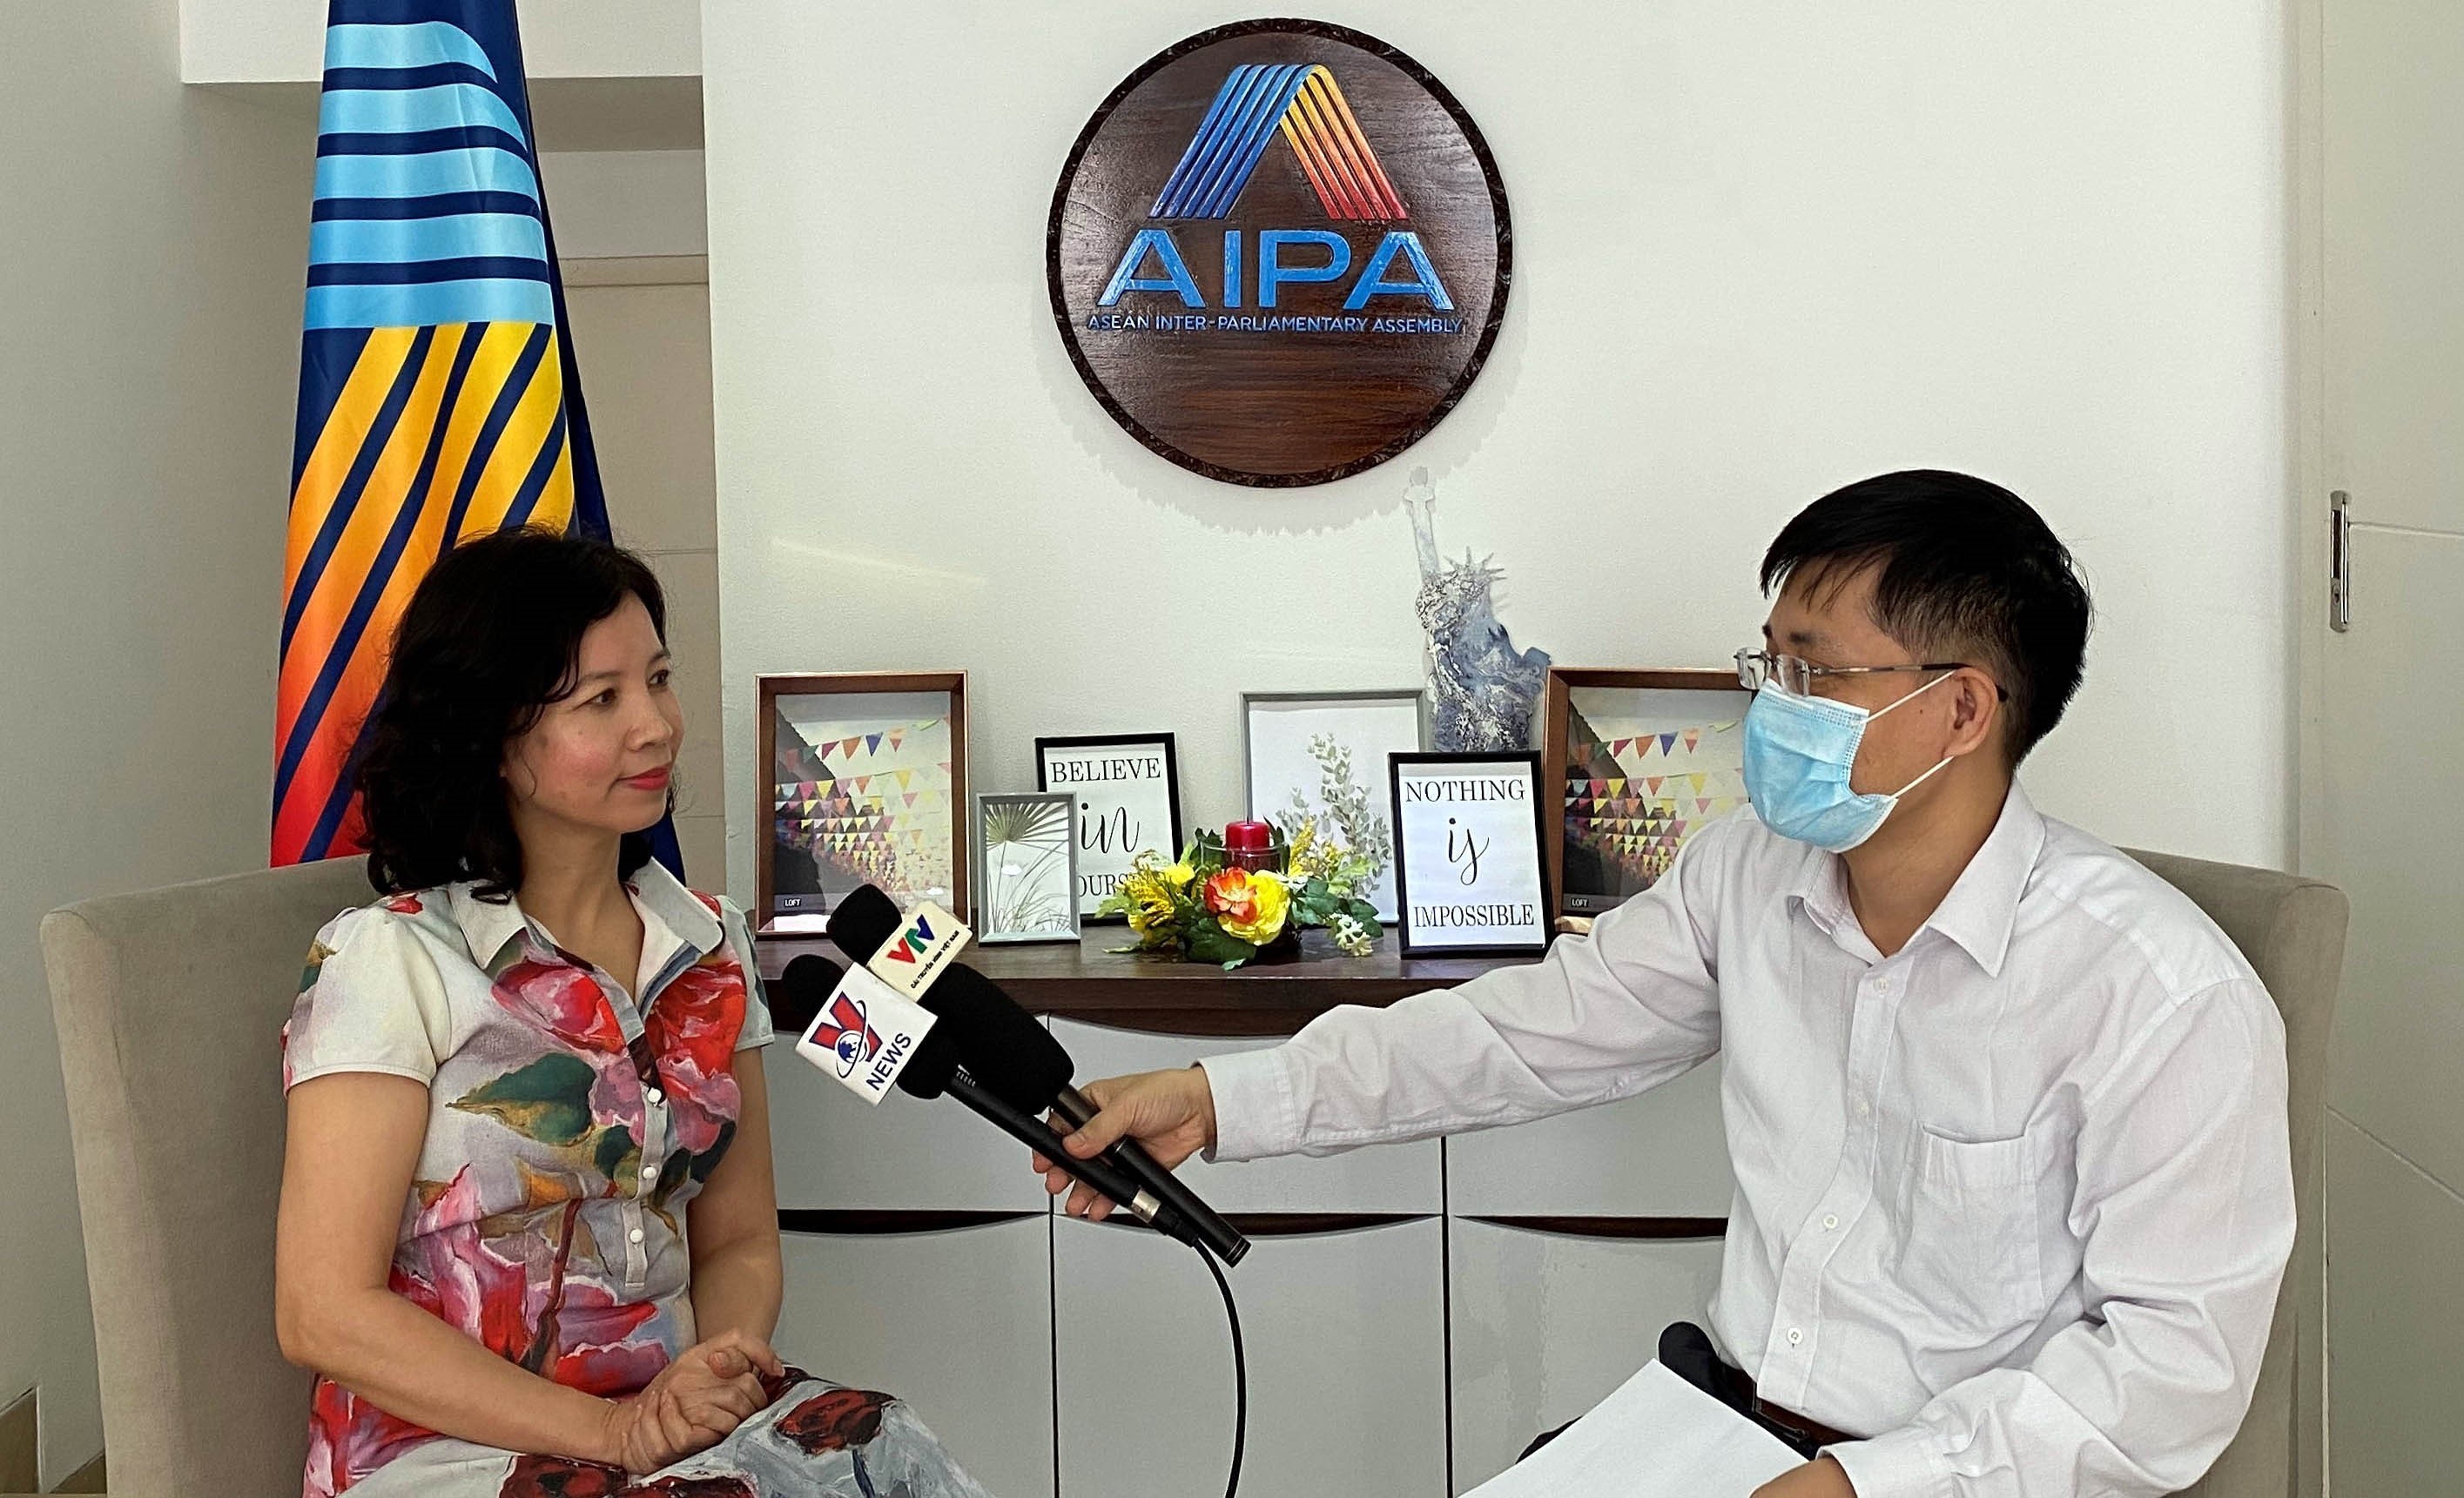 AIPA ready to join hands with ASEAN to build sustainable community hinh anh 1